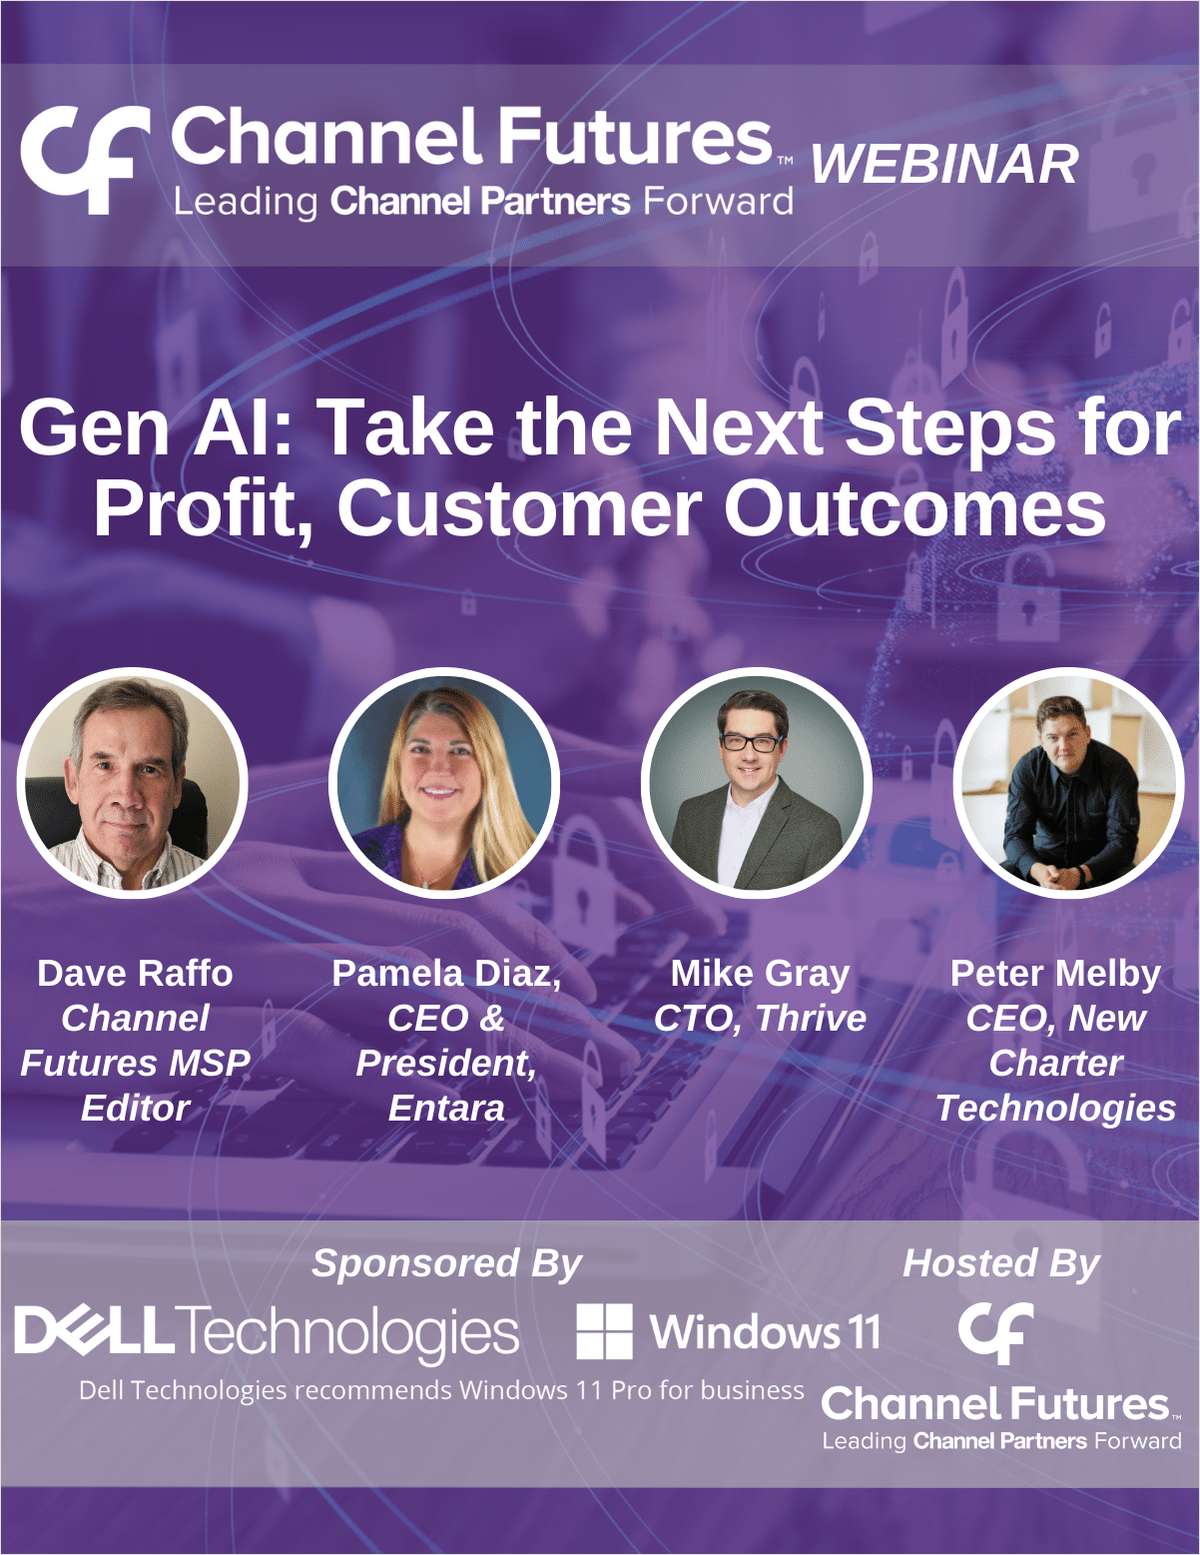 Gen AI: Take the Next Steps for Profit, Customer Outcomes